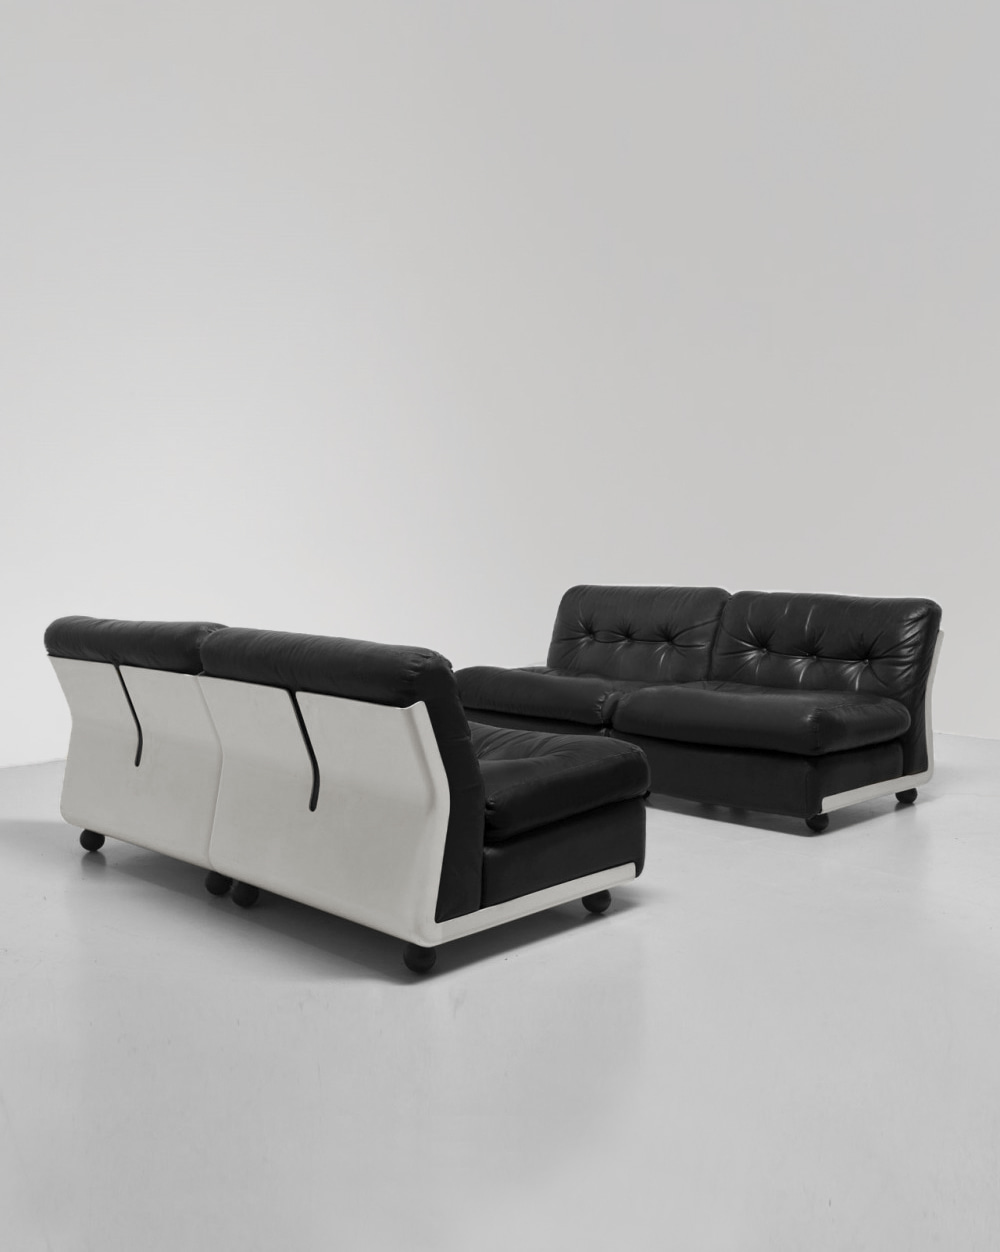 Flowing Furniture, SPACE sofa.